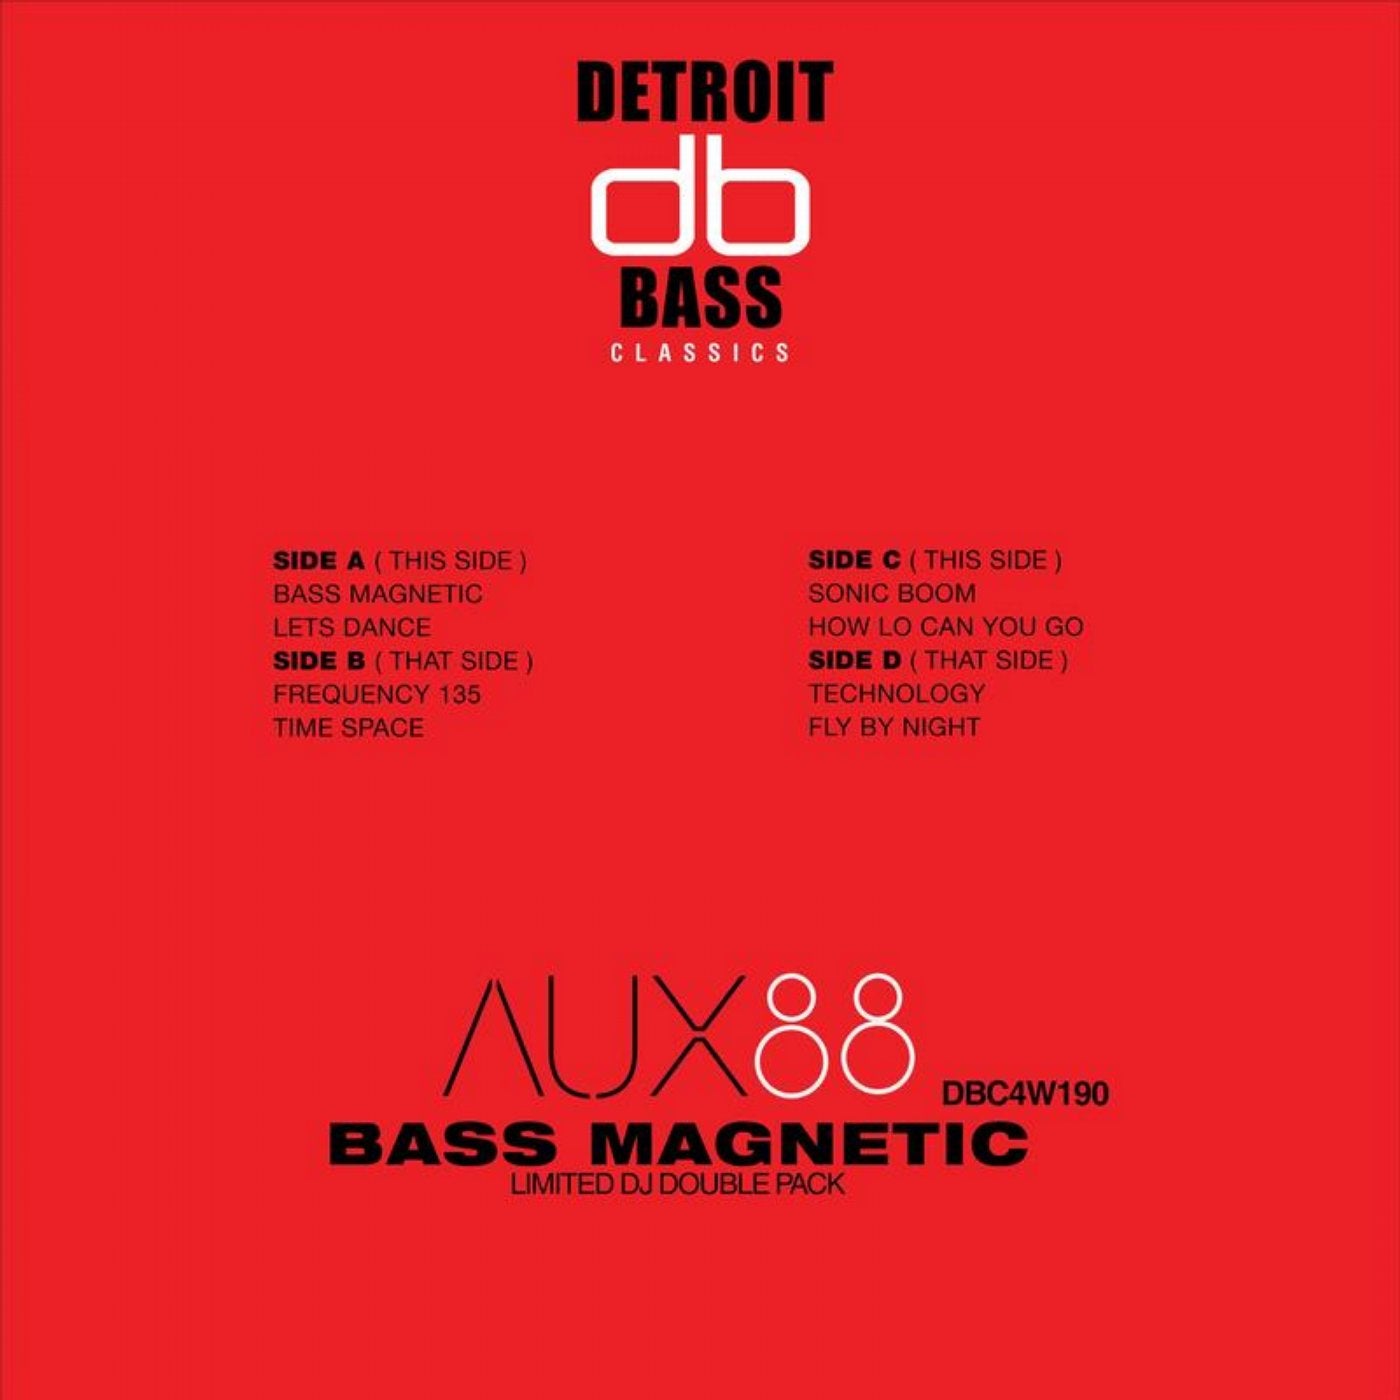 Bass Magnetic